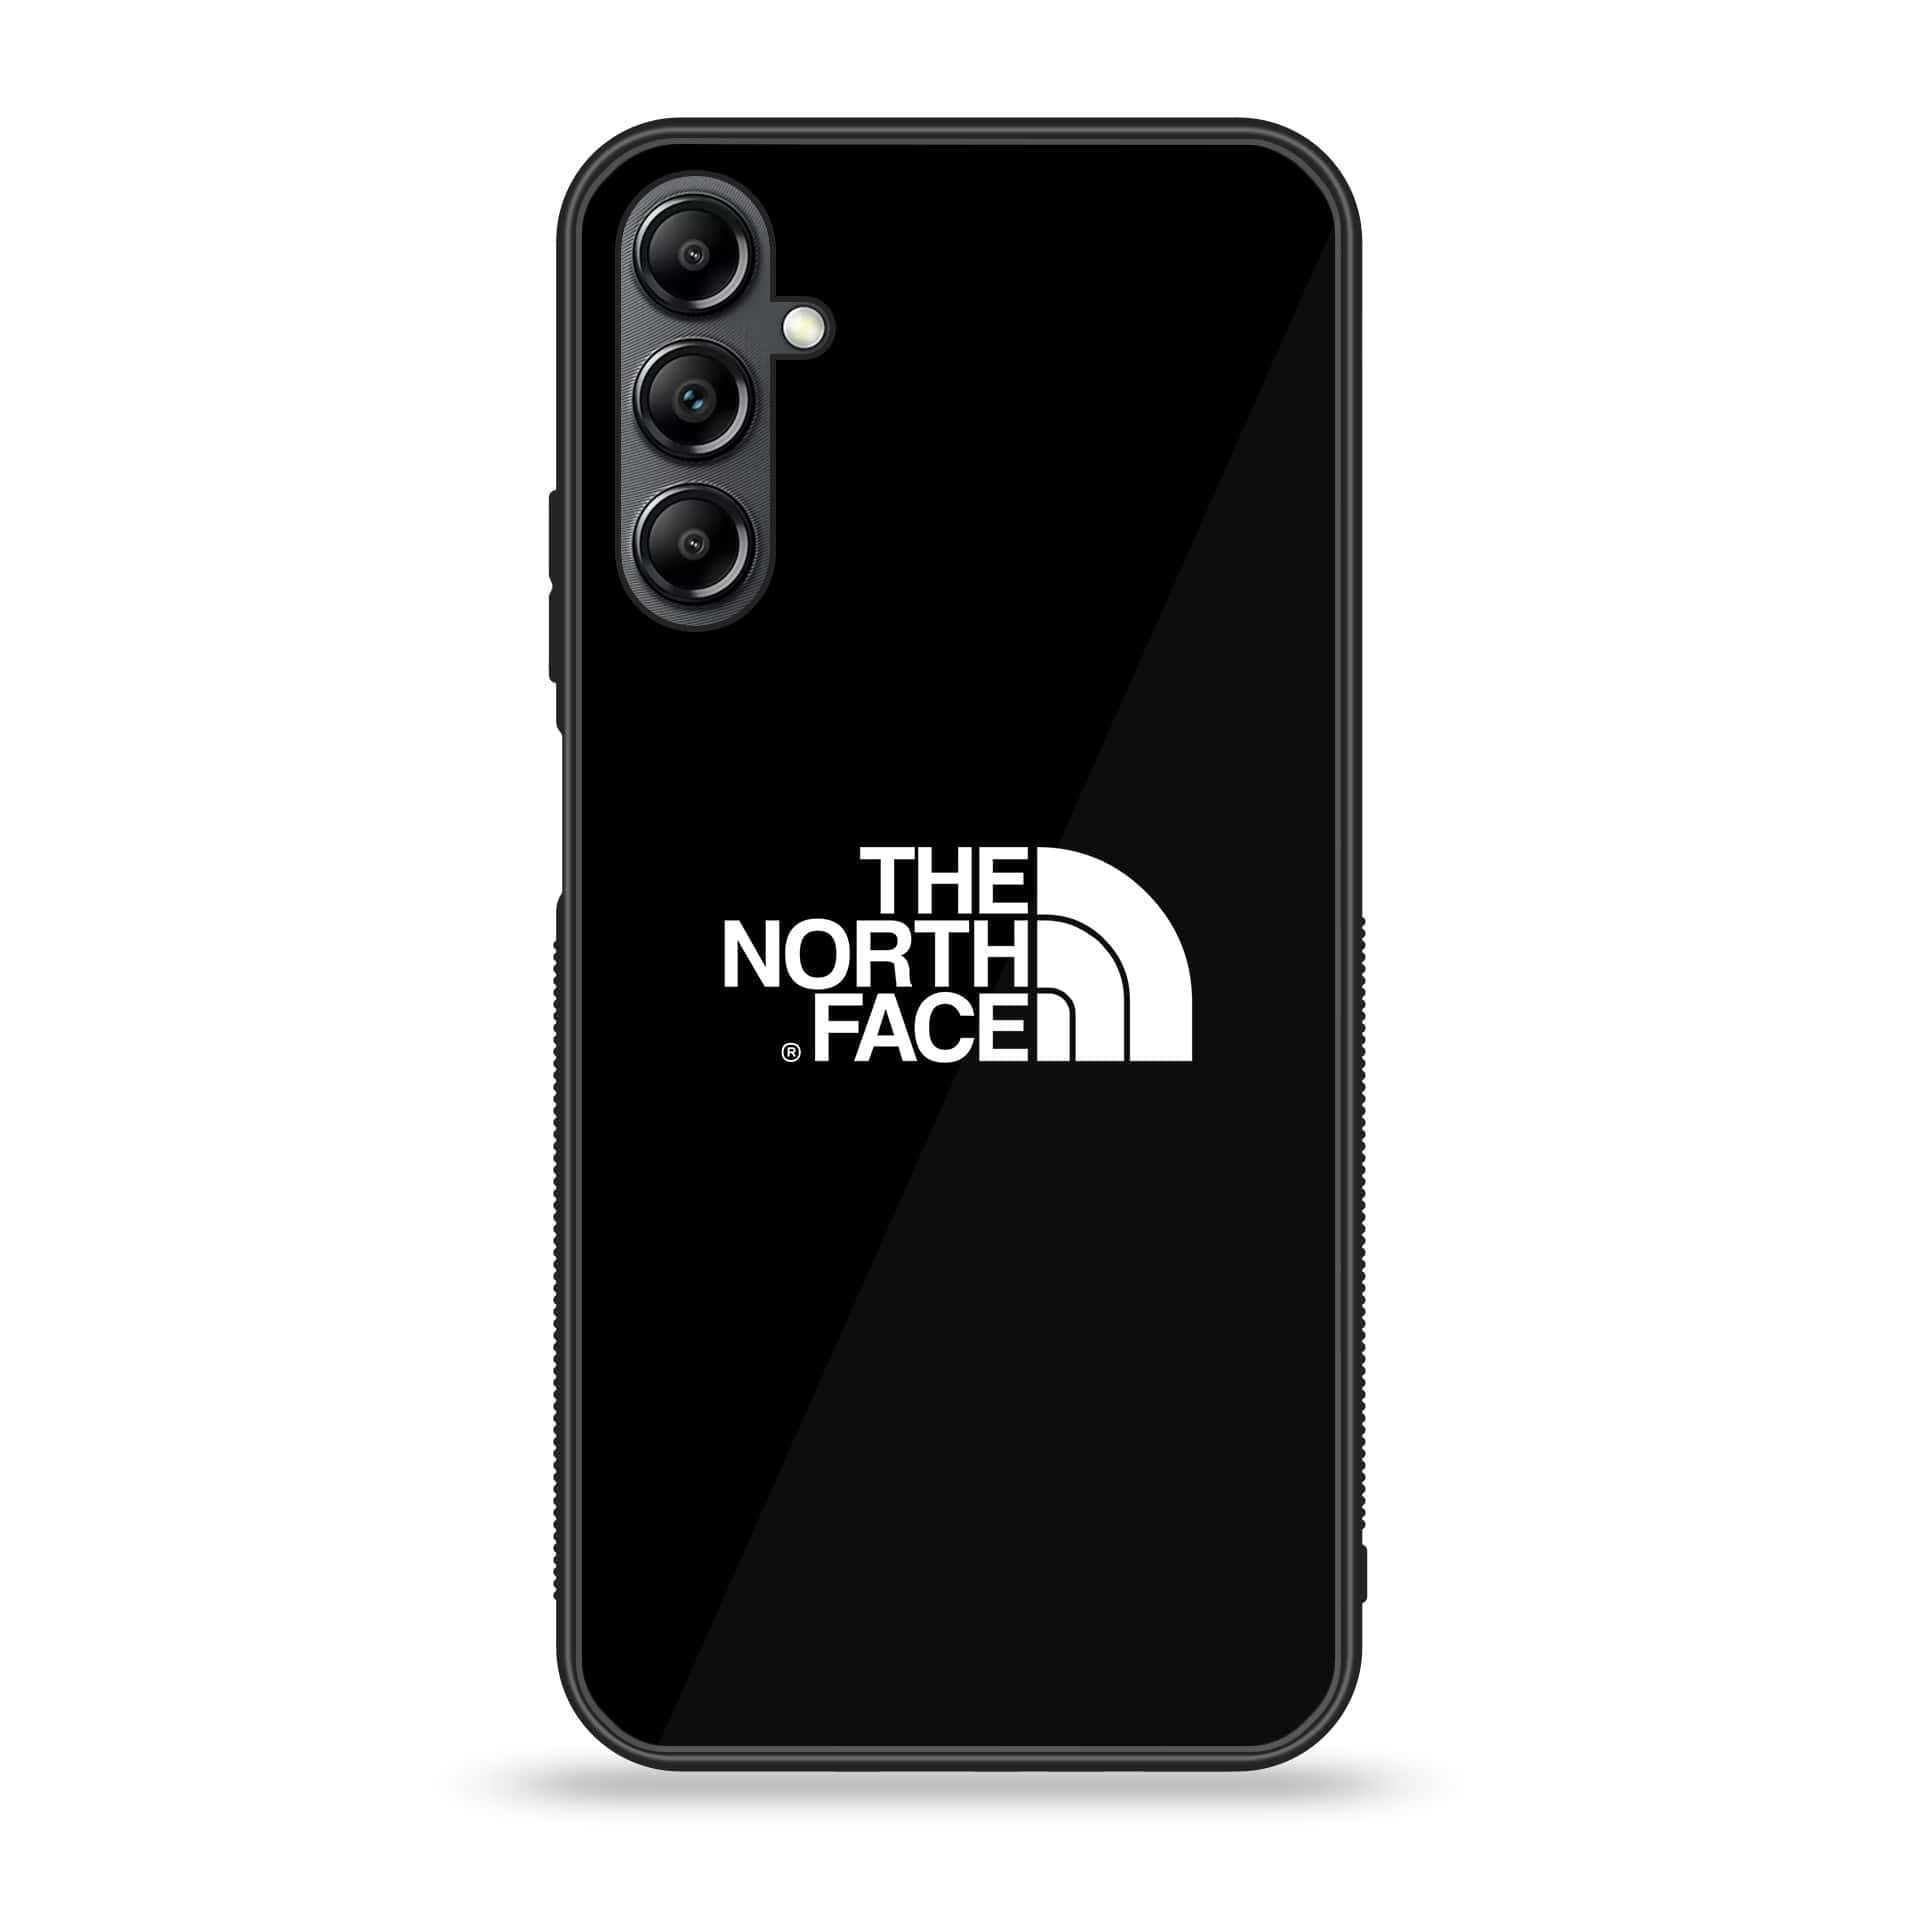 Samsung Galaxy A25 - The North Face Series - Premium Printed Glass soft Bumper shock Proof Case